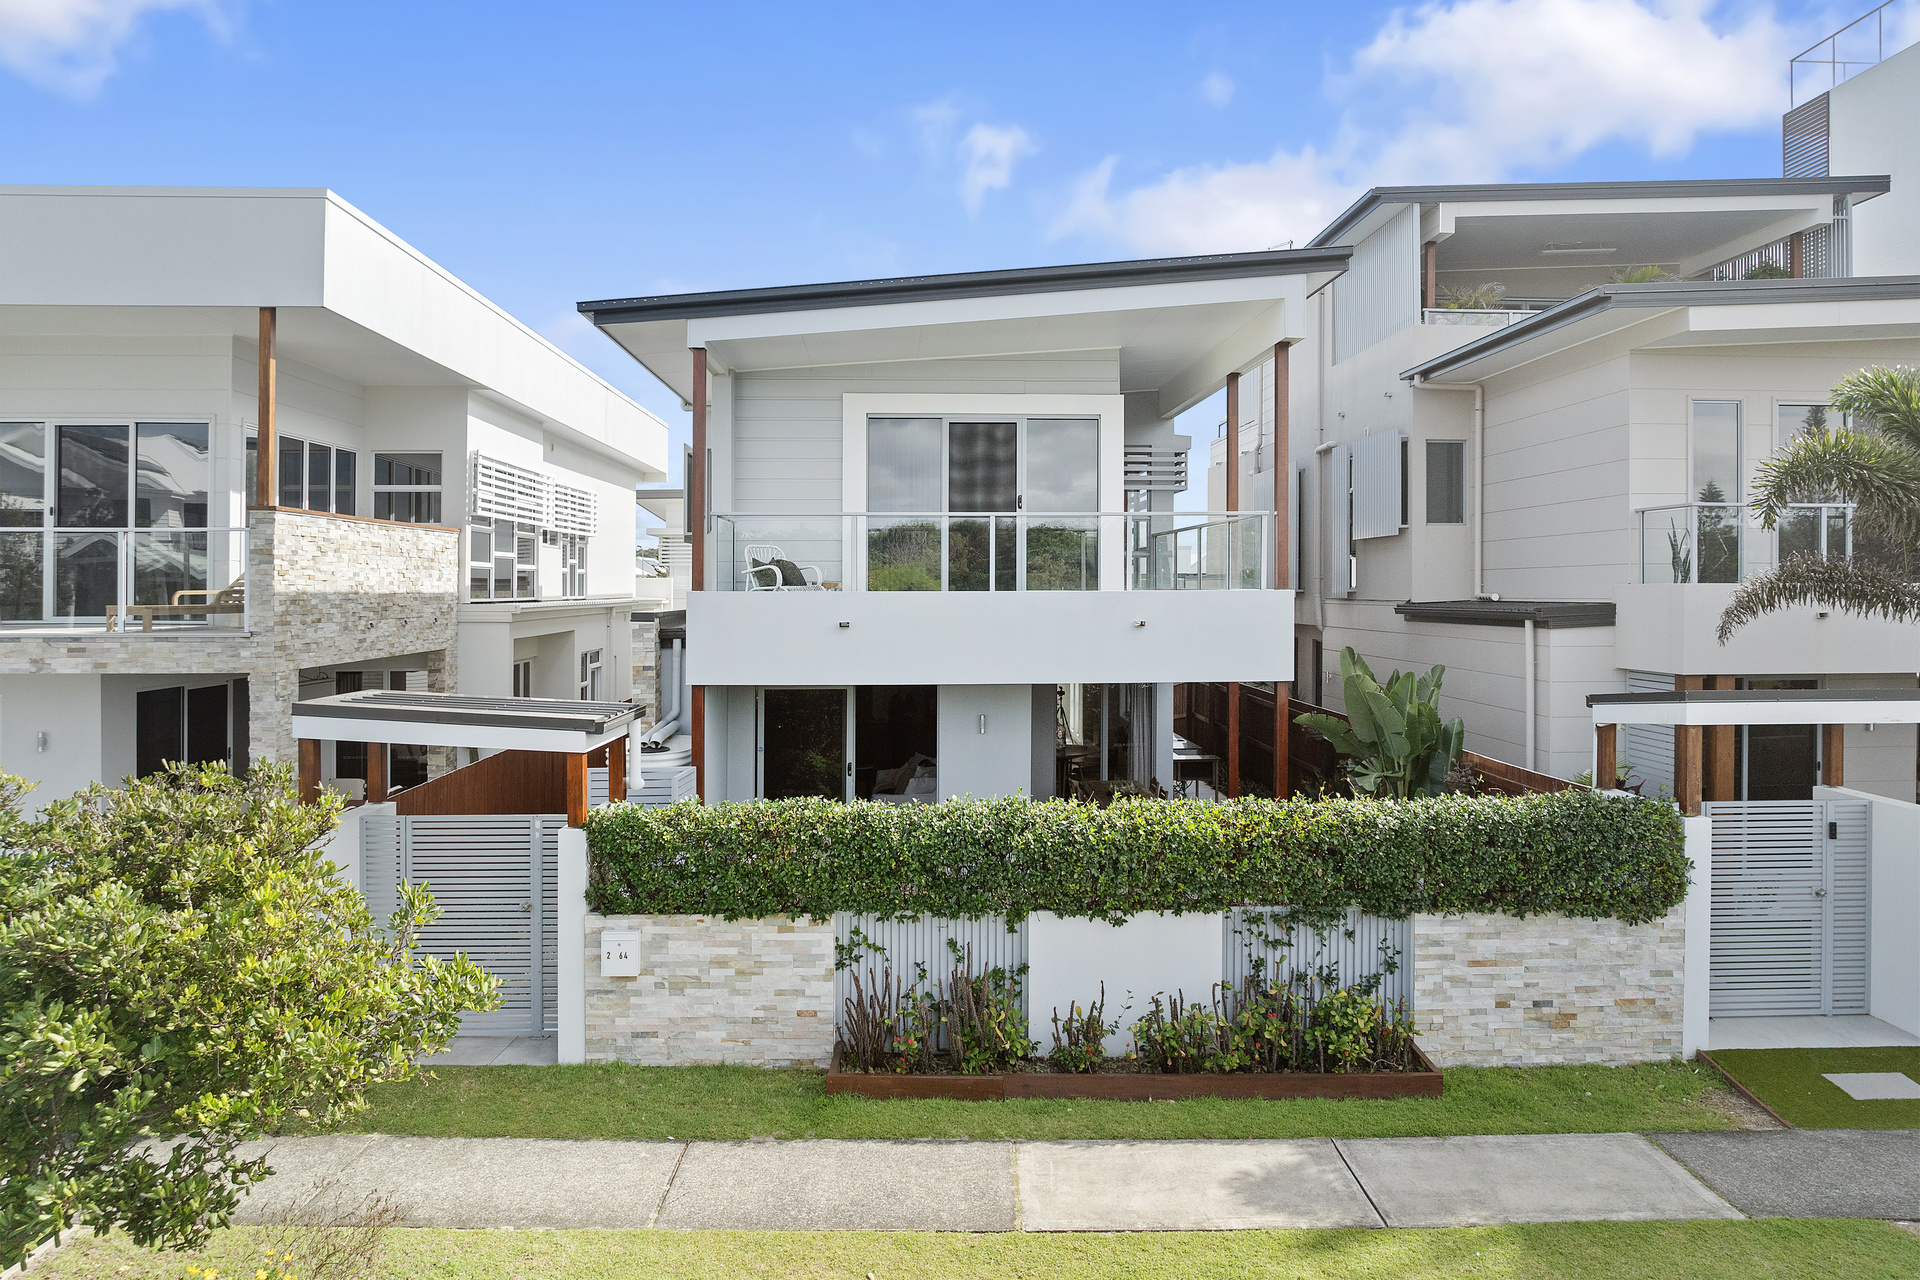  Location, Lifestyle and Beach Elegance - Kingscliff